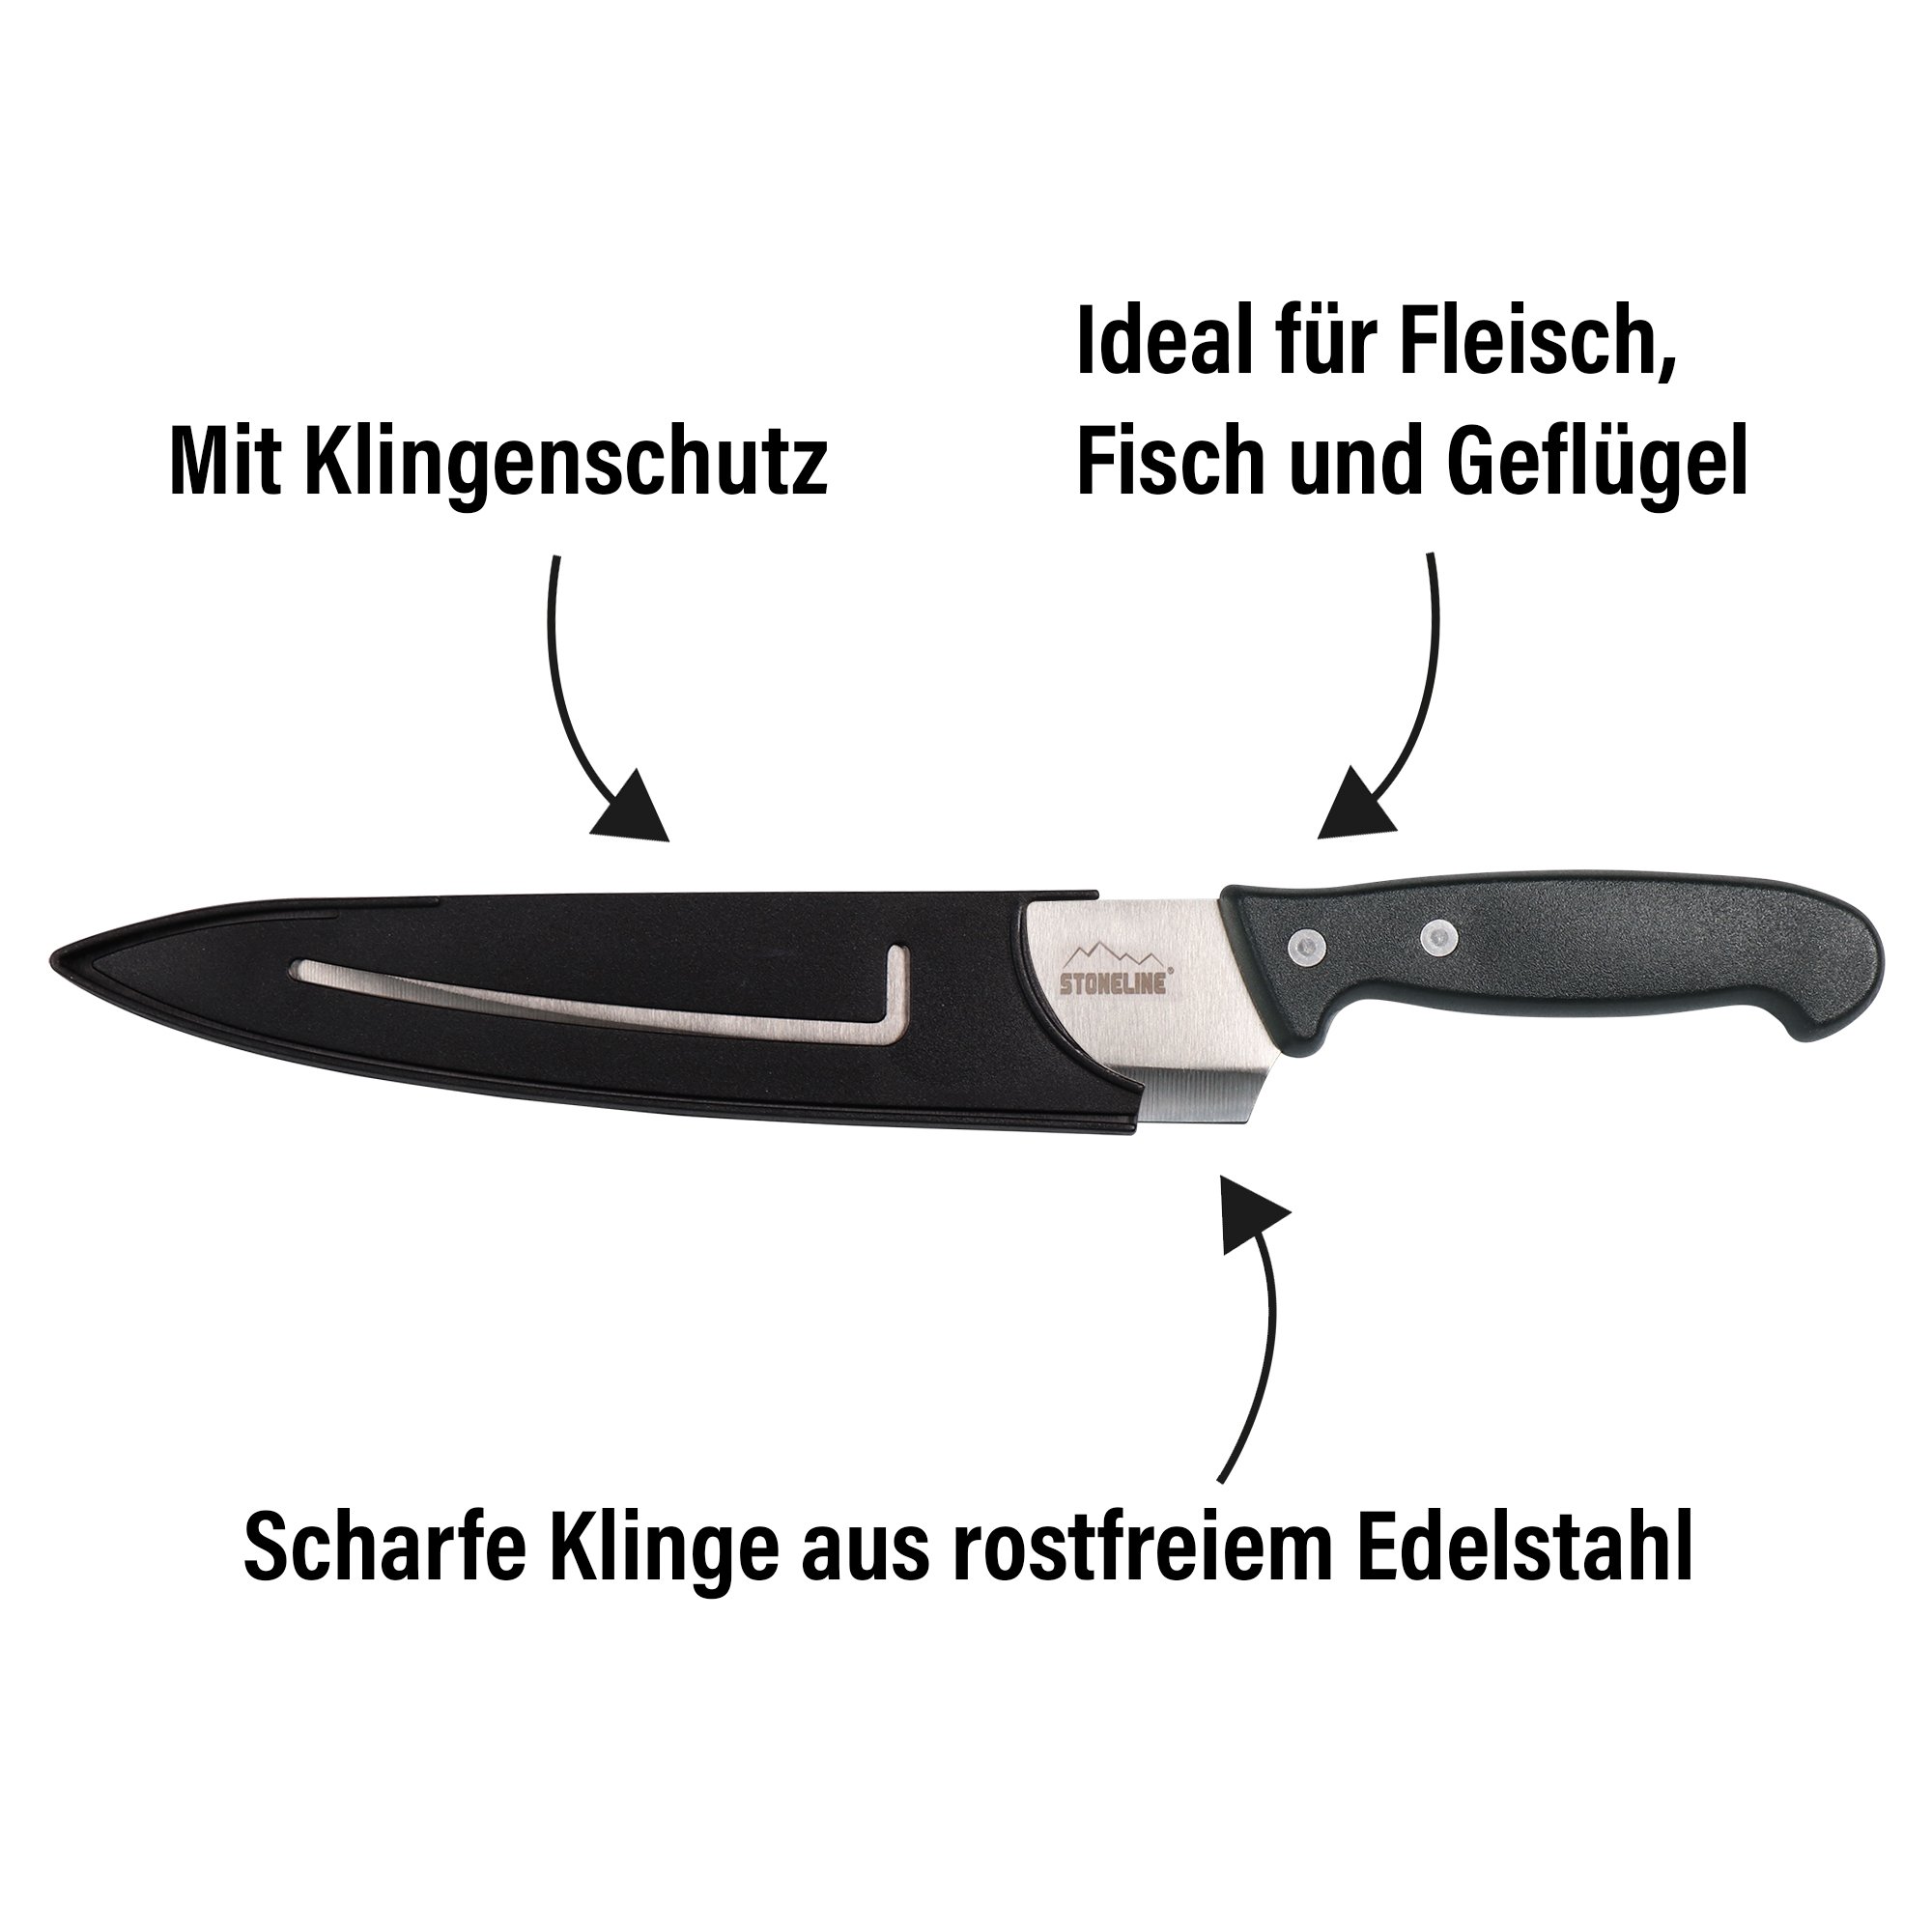 STONELINE® Stainless Steel Knife 31.5 cm Chef's Knife, Safety Sheath